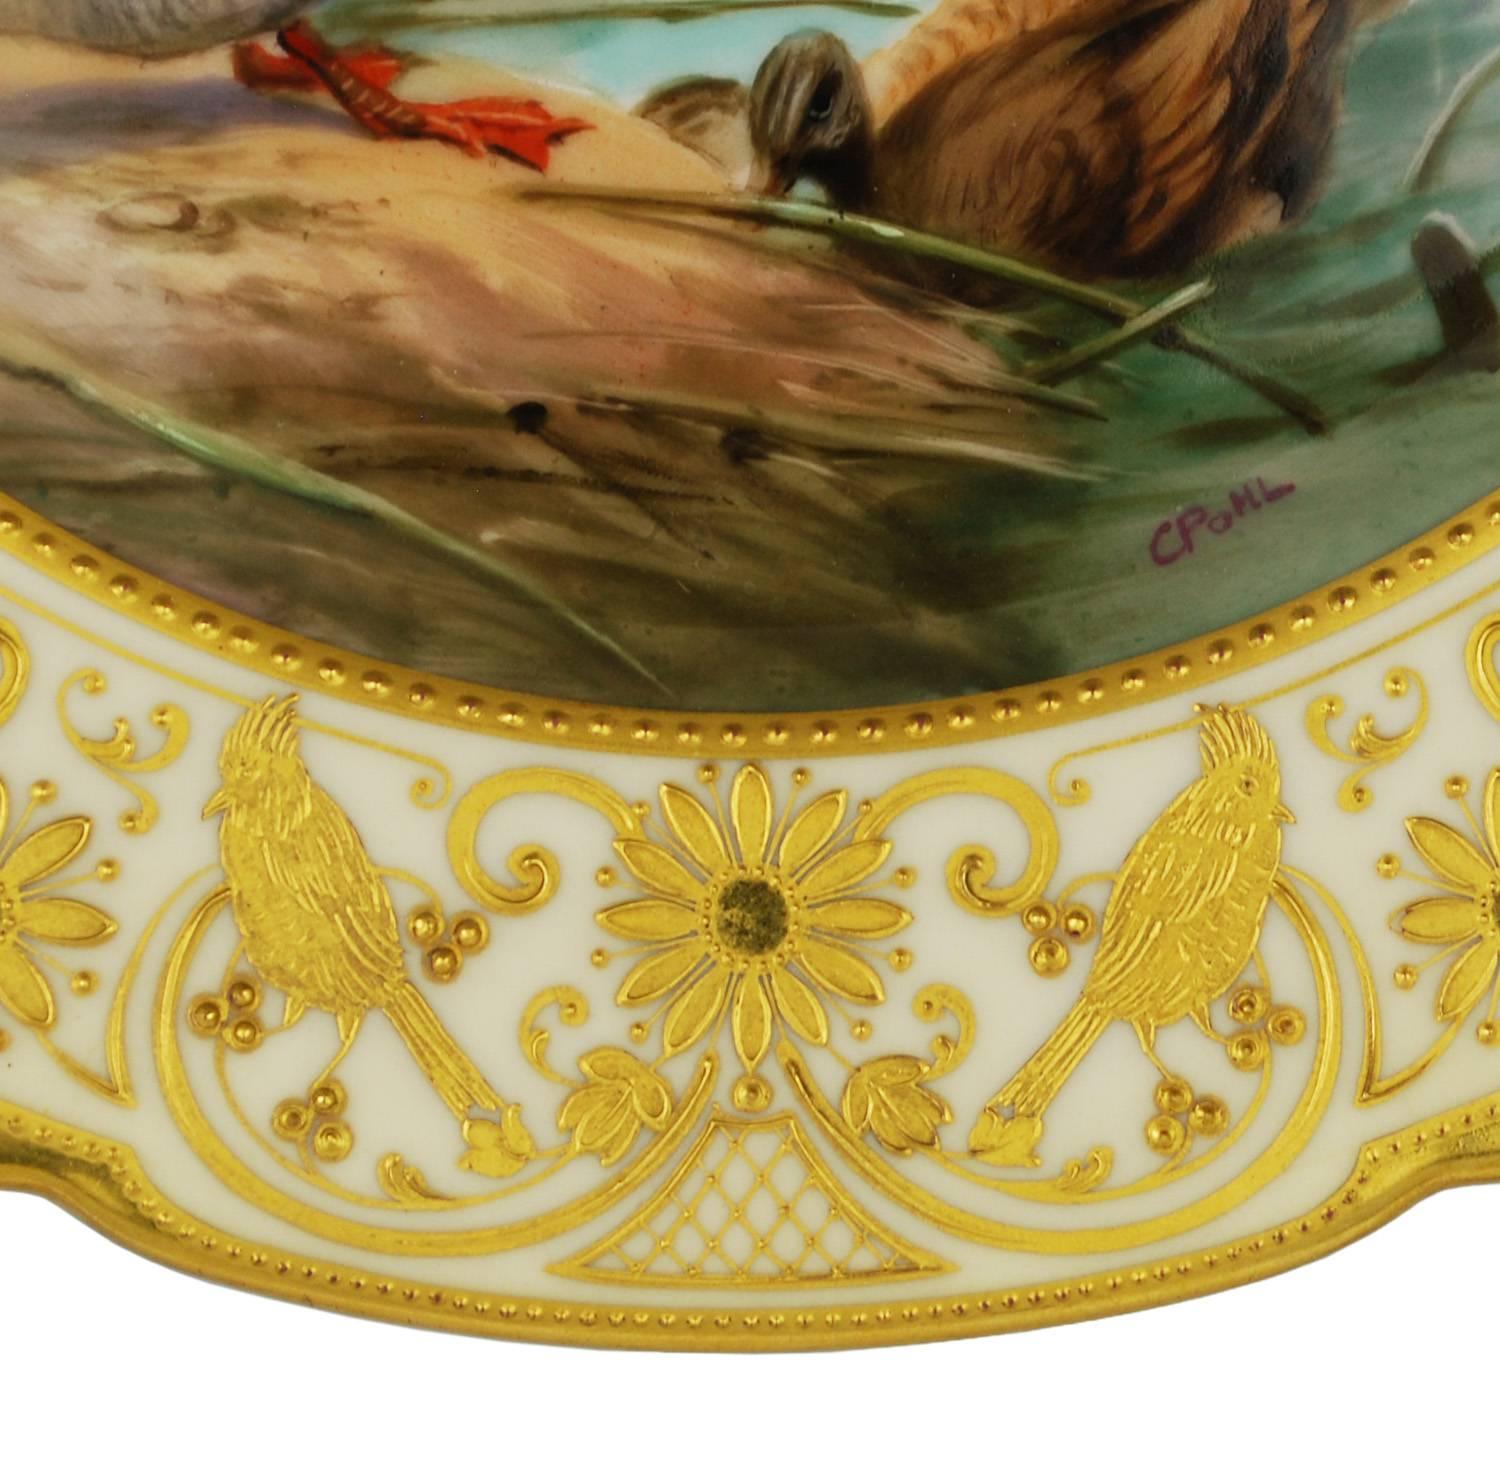 German Antique Cabinet Game Bird Plate Hand-Painted Gilt Attributed to Lamm Studio